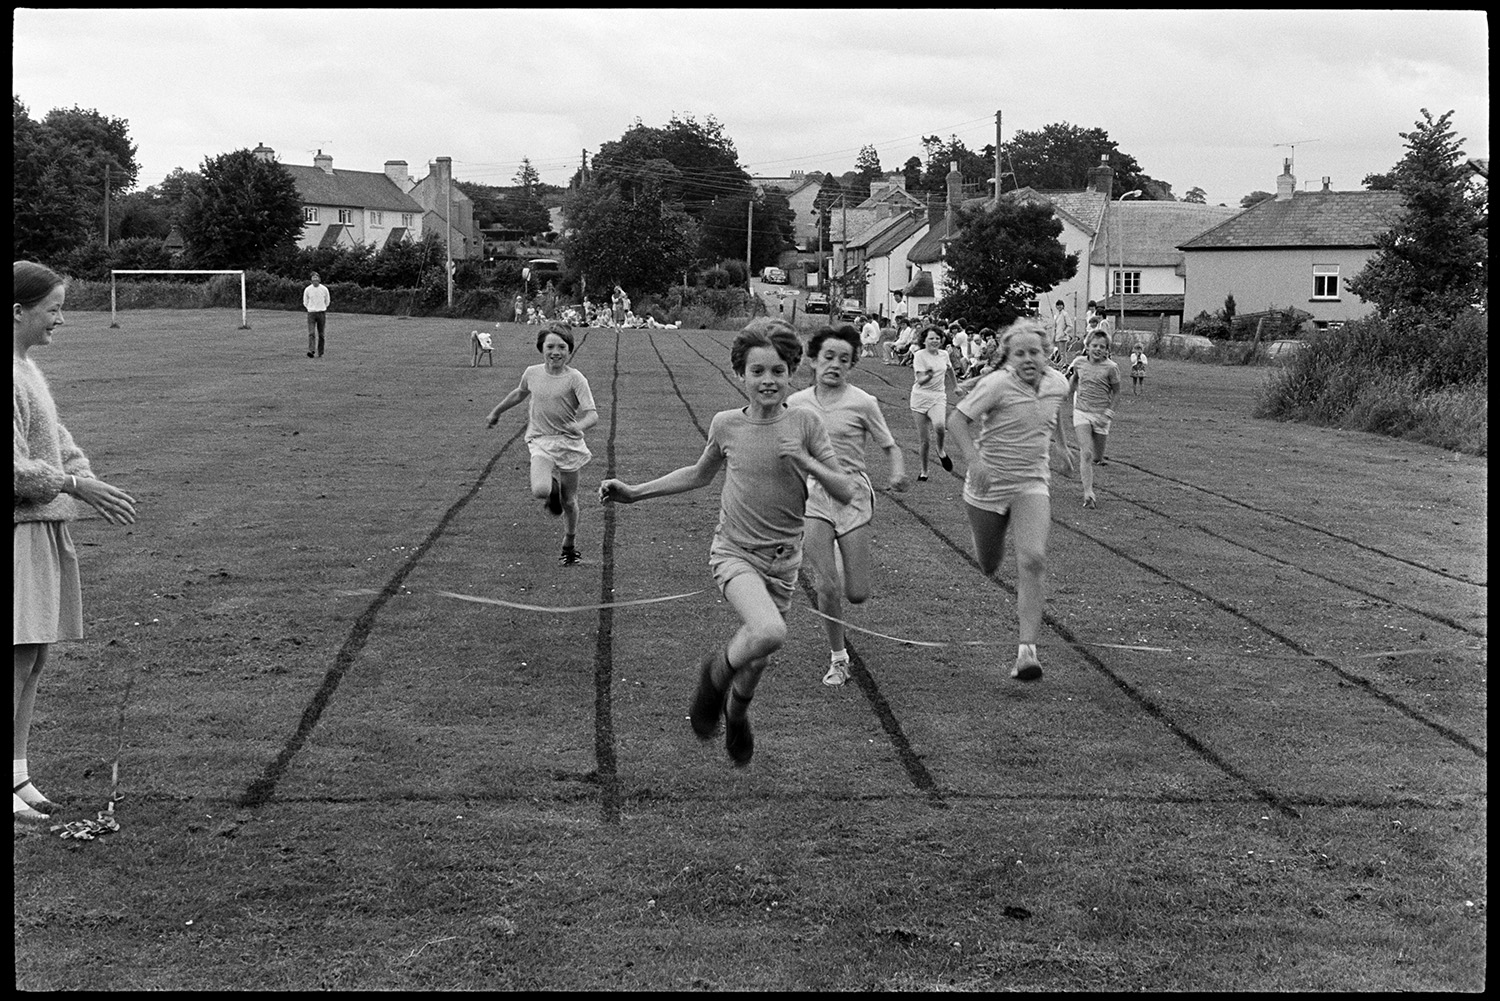 School Sports day, races, sack race, egg and spoon. 
[Children competing in a running race at Dolton School sports day. A boy is crossing the finishing line and winning the race. Spectators are watching in the background.]